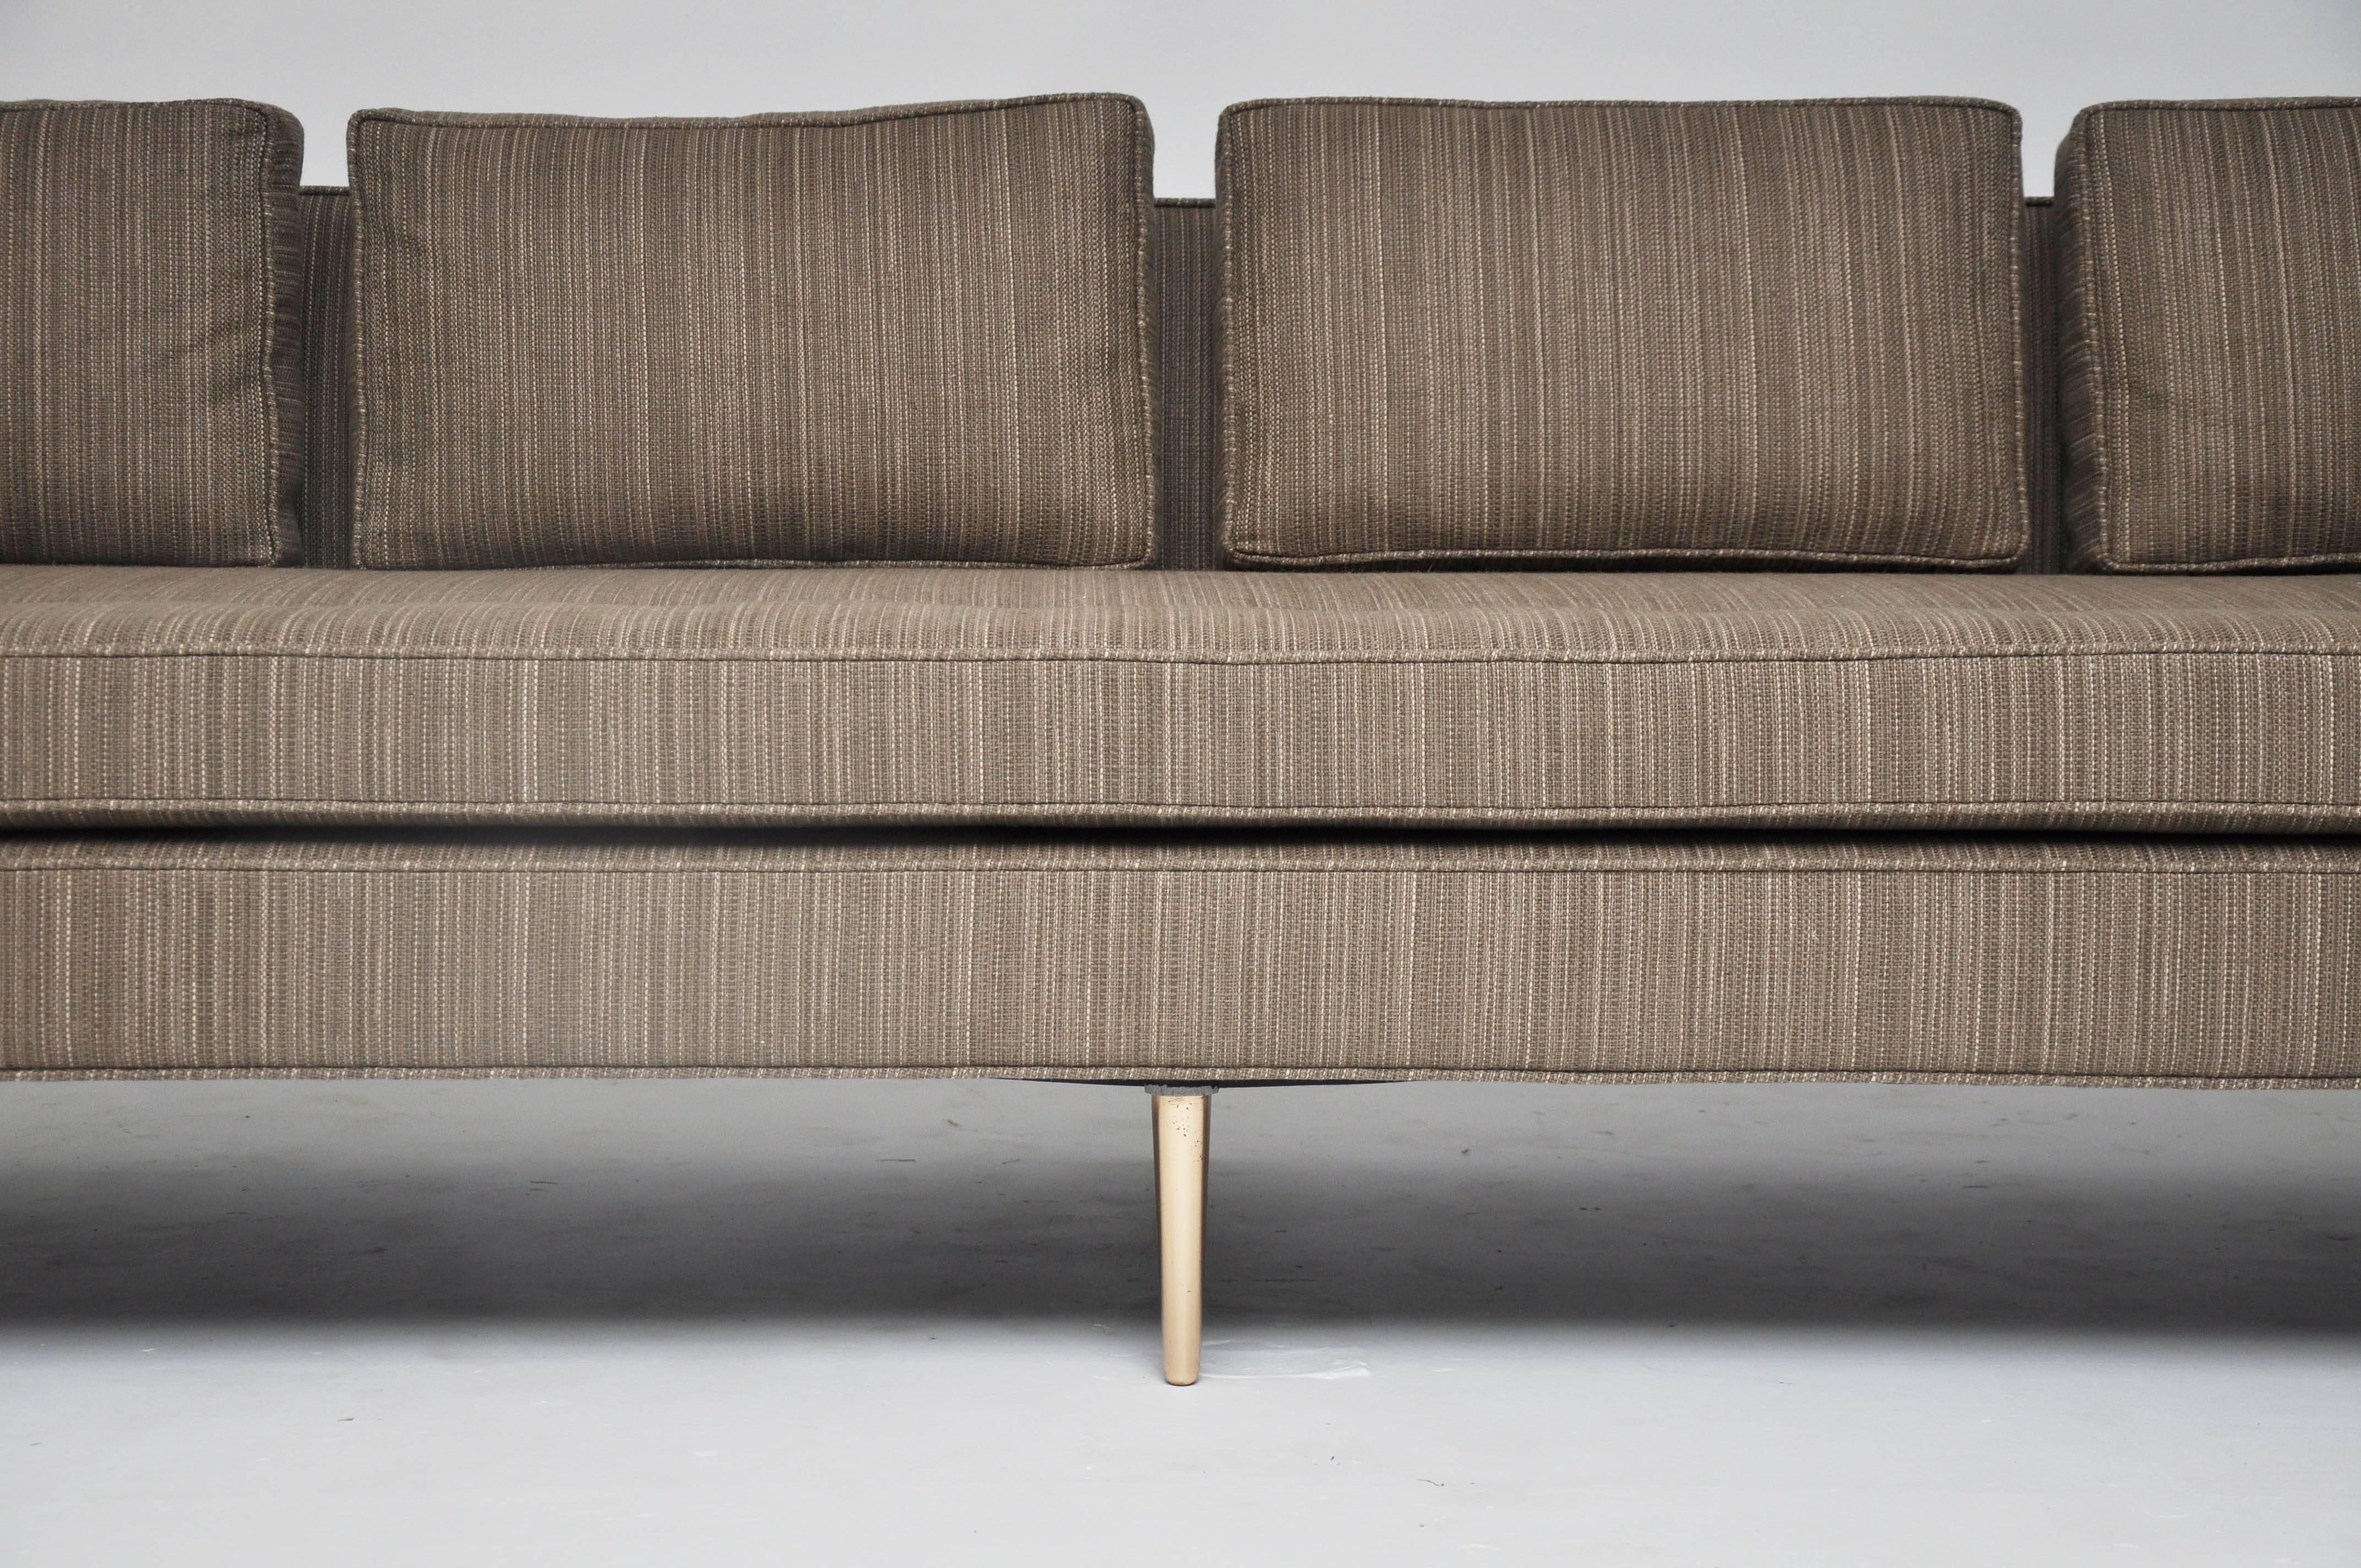 9' sofa on brass legs designed by Edward Wormley for Dunbar. Newly upholstered in horse hair fabric with down back cushions.